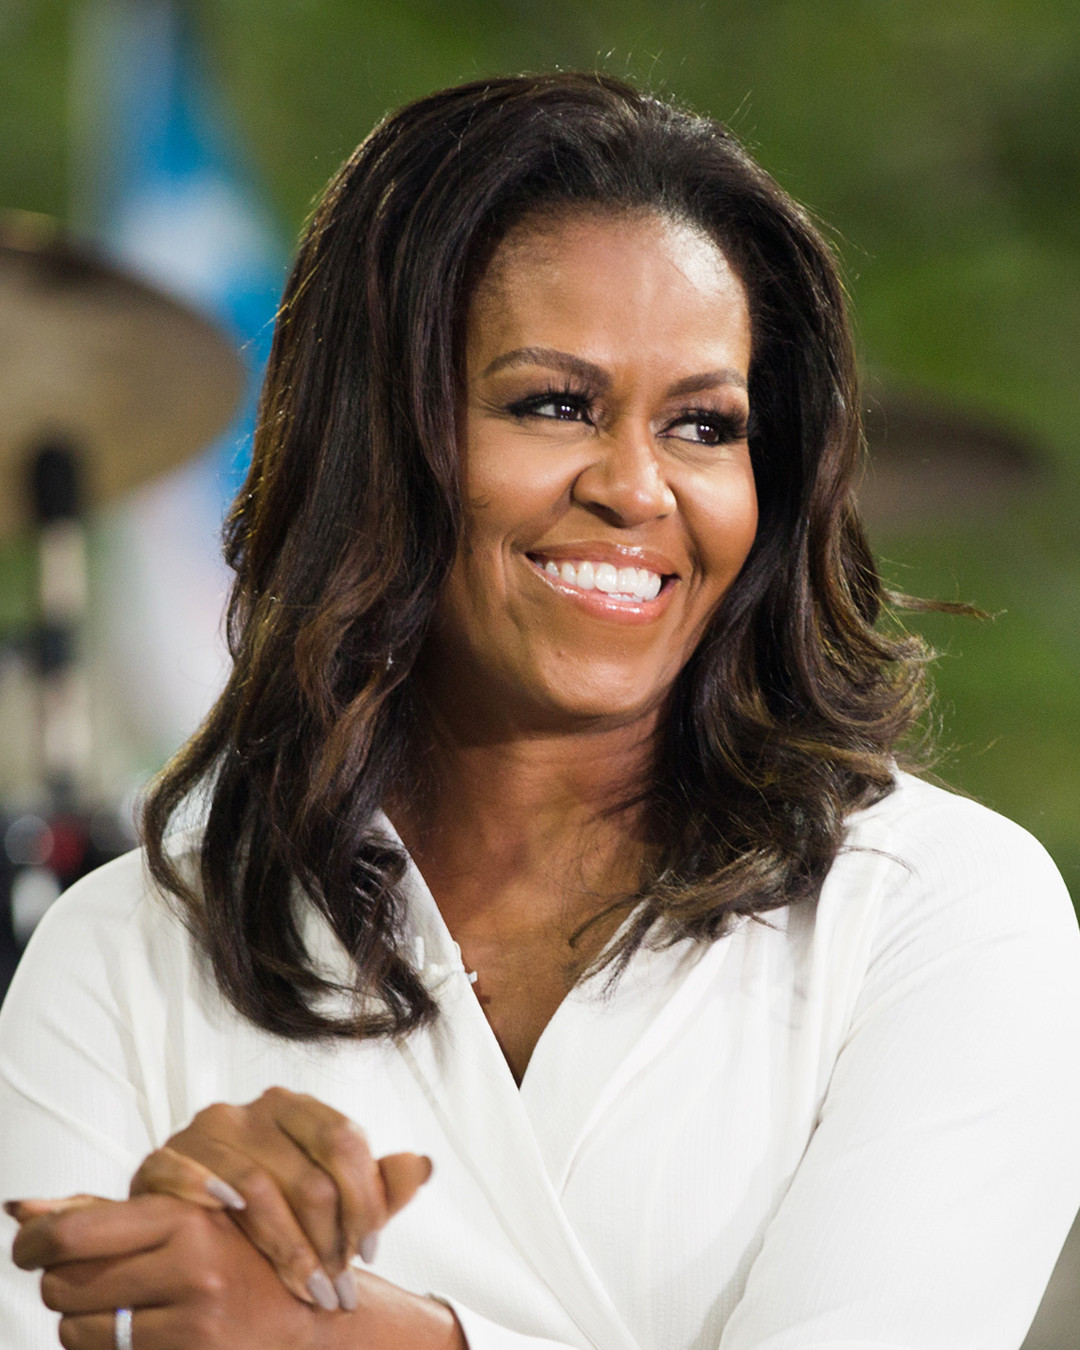 michelle obama stuns with curly hair and shares why she's